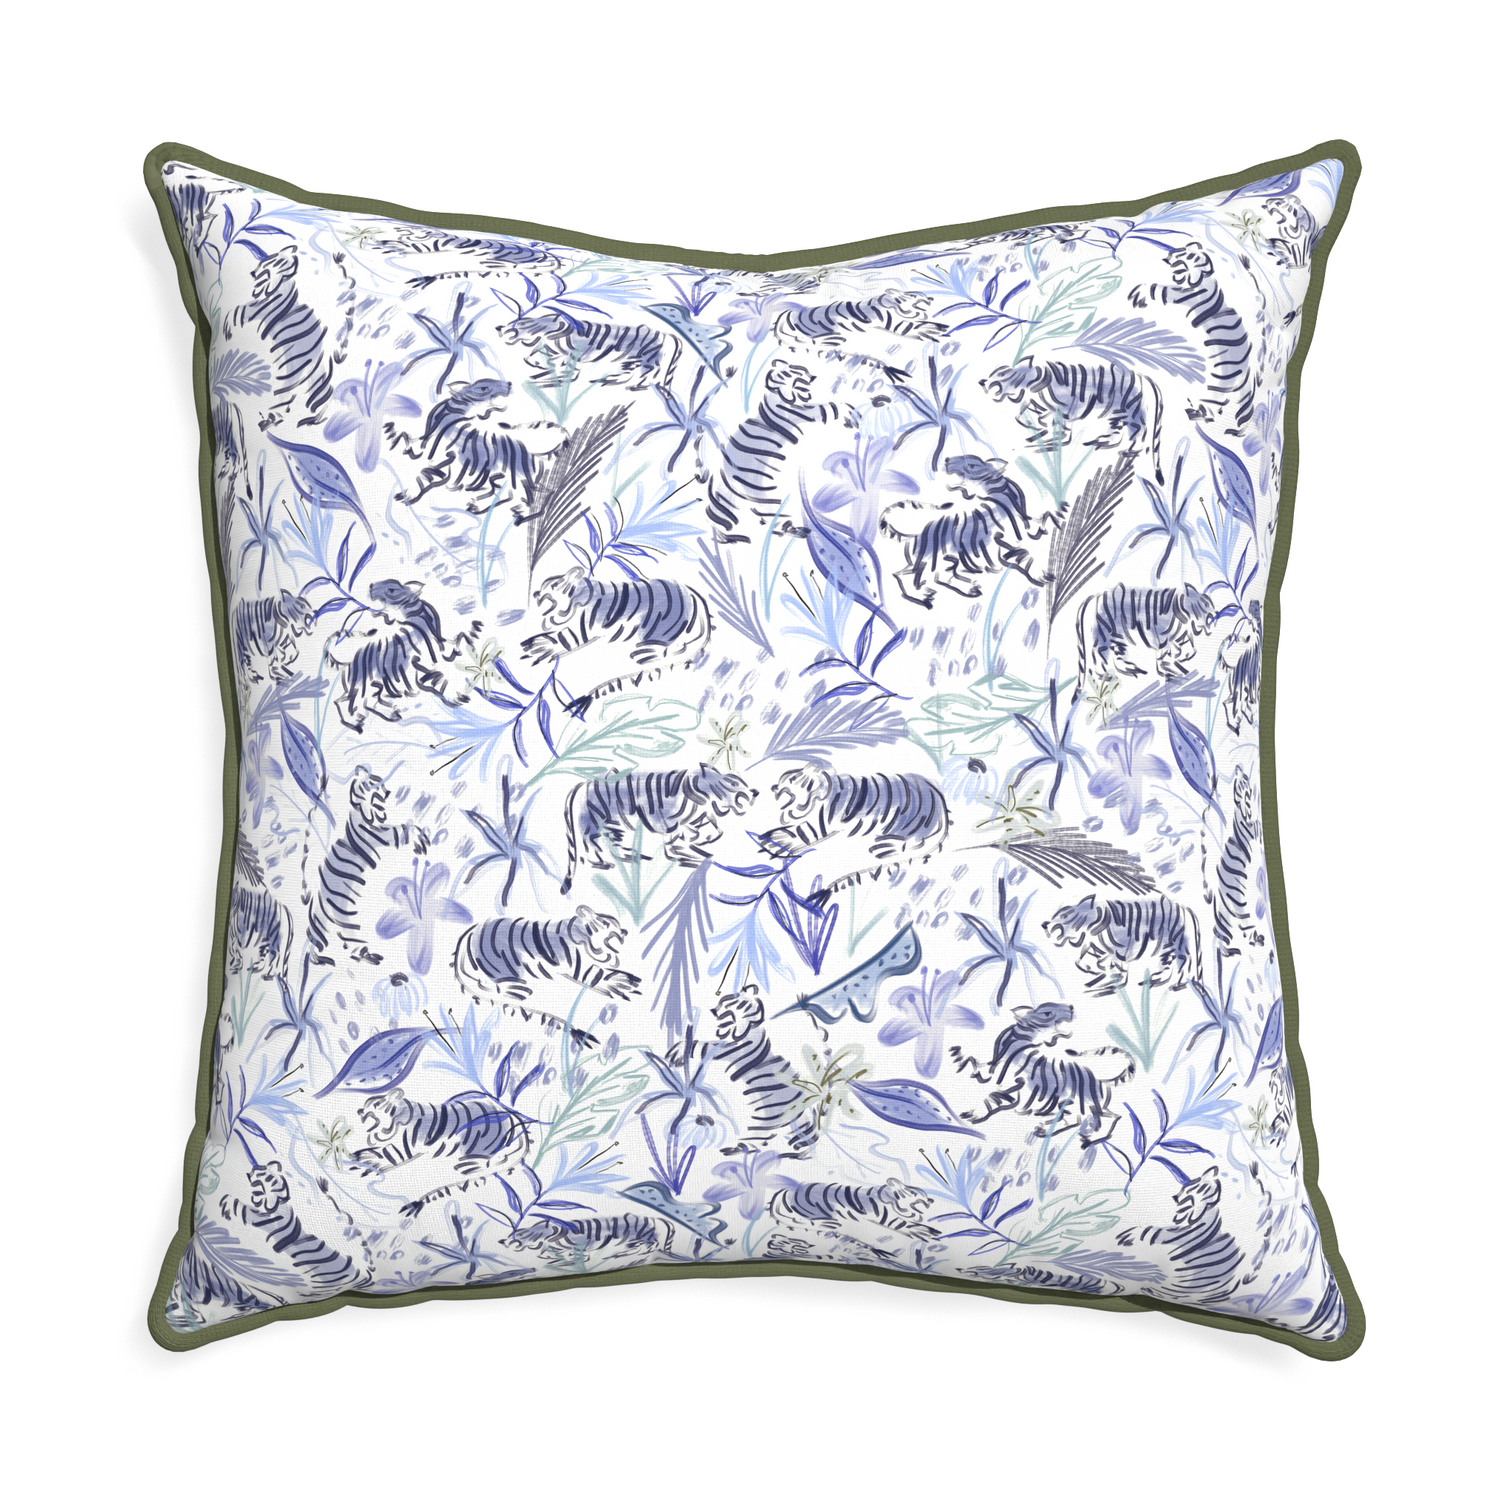 Euro-sham frida blue custom blue with intricate tiger designpillow with f piping on white background